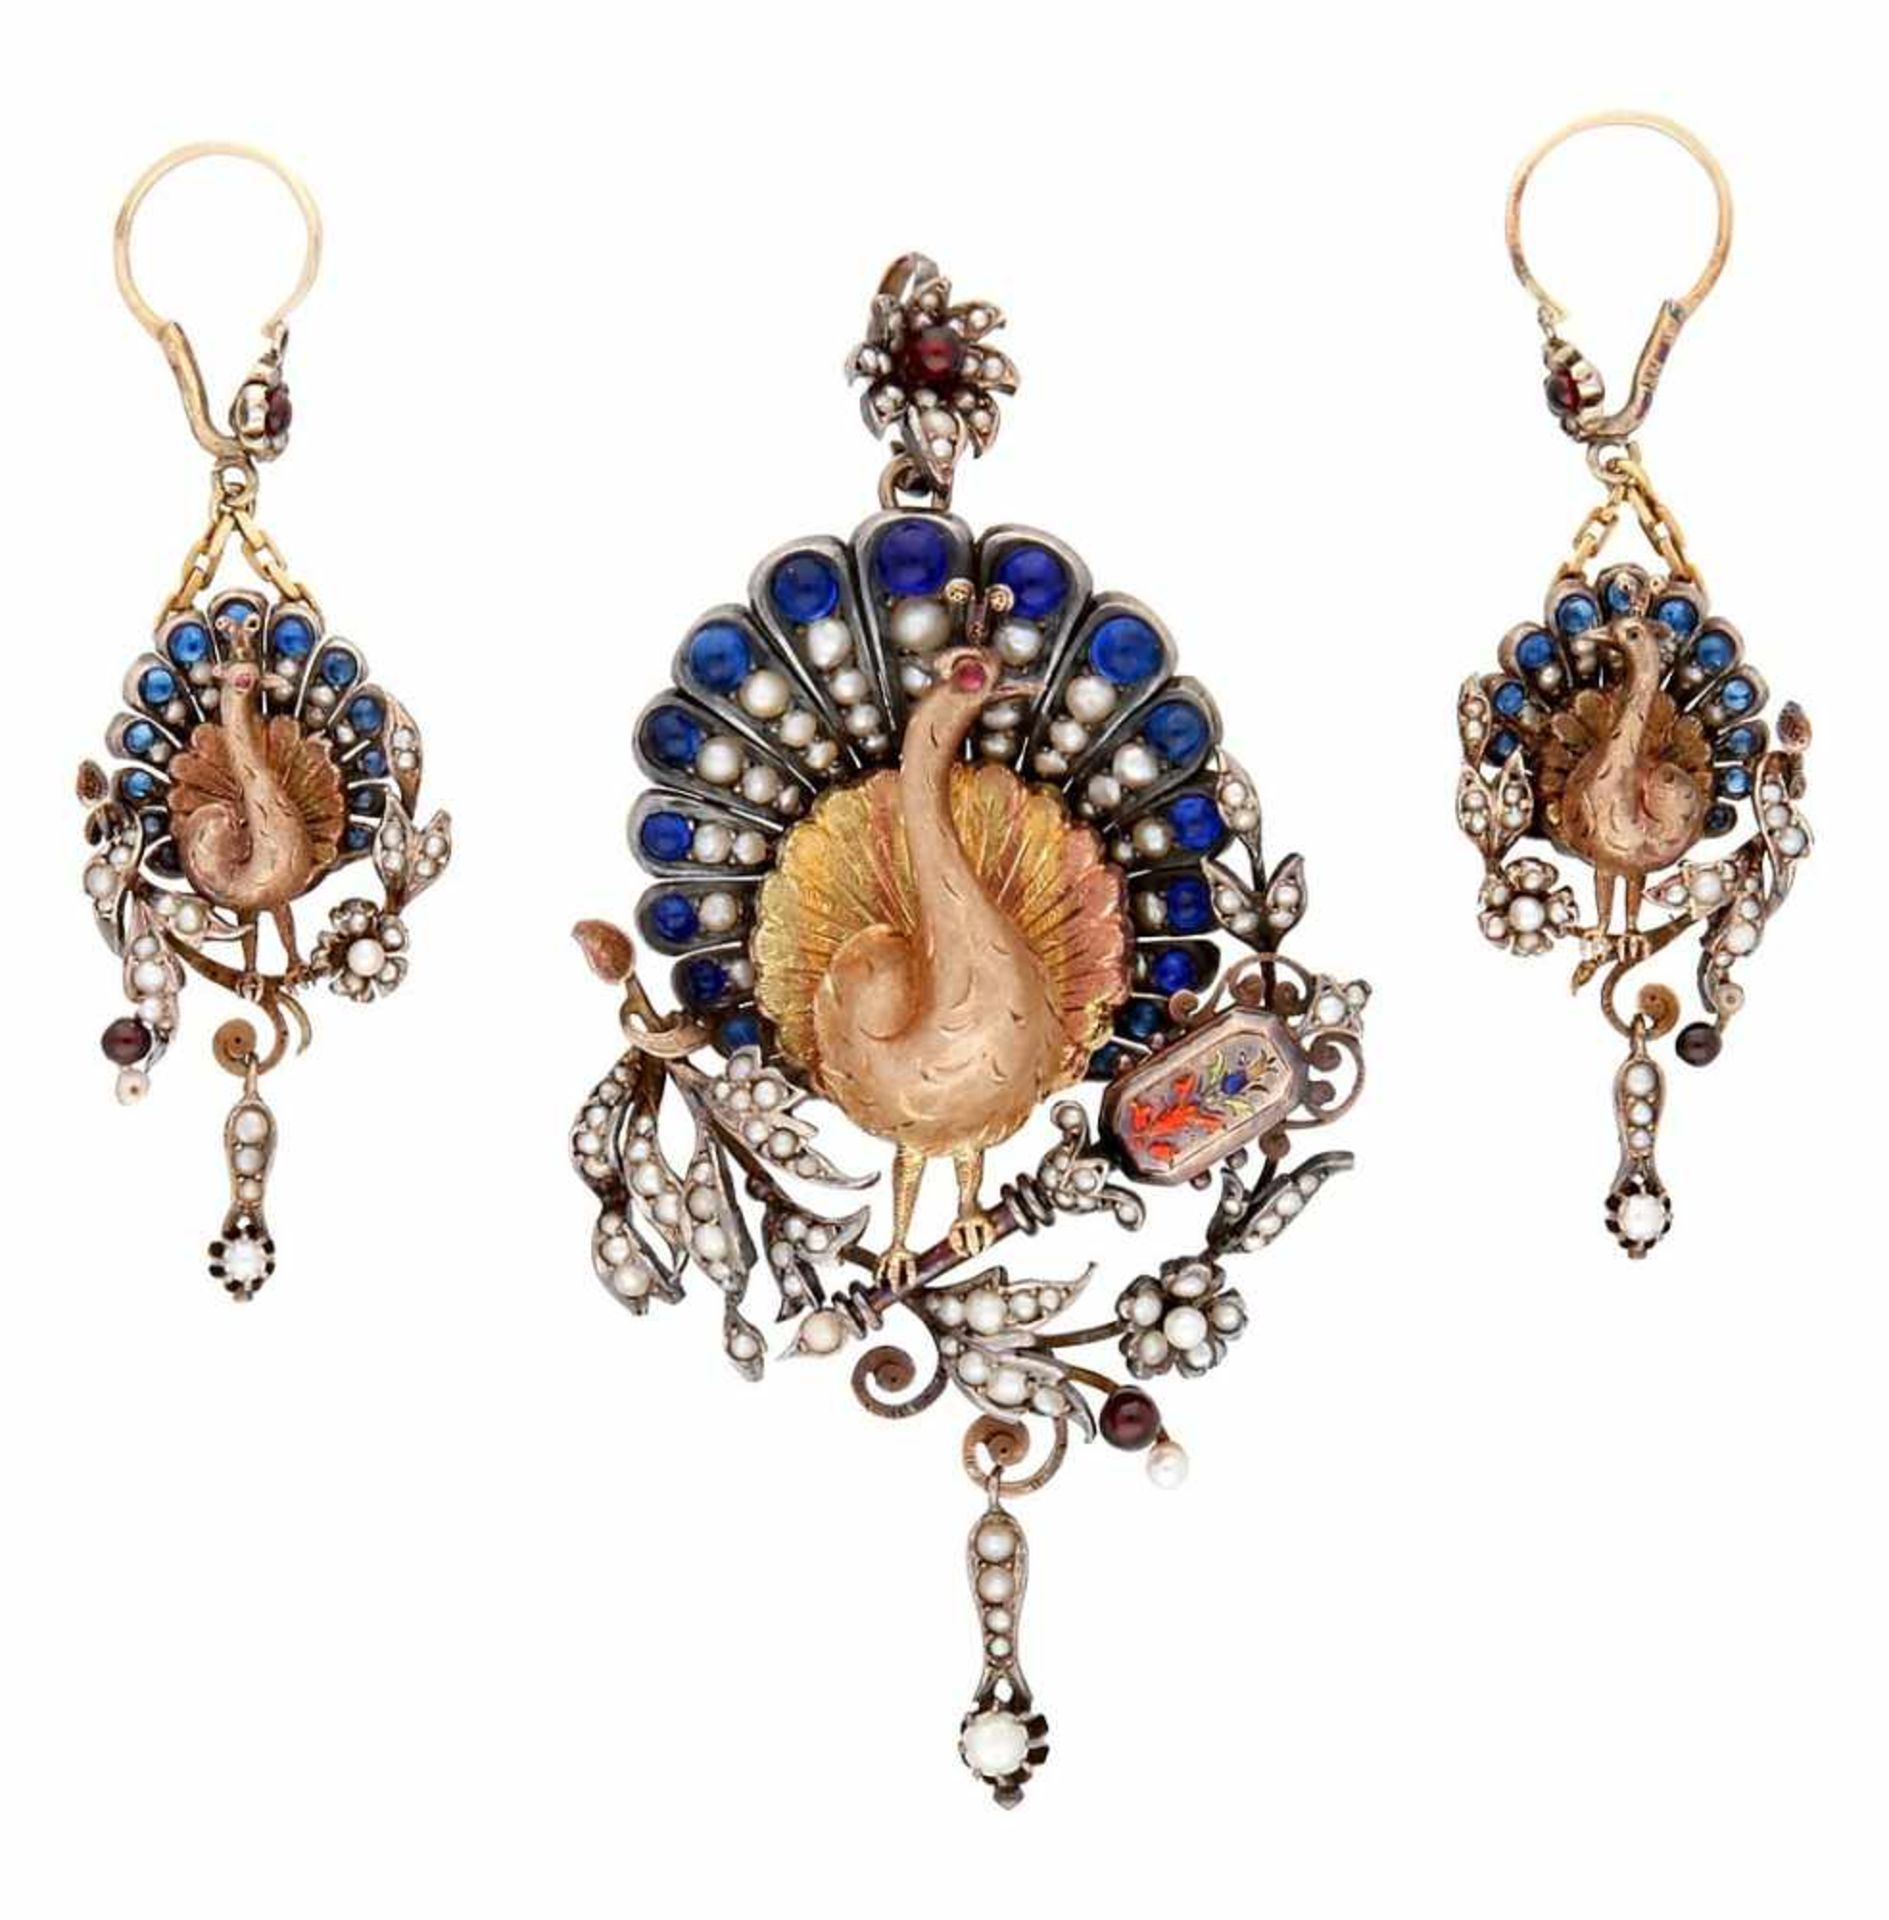 Brooch-pendant and earrings set in the shape of a turkey, 19th Century.Gold, seed pearls, blue and